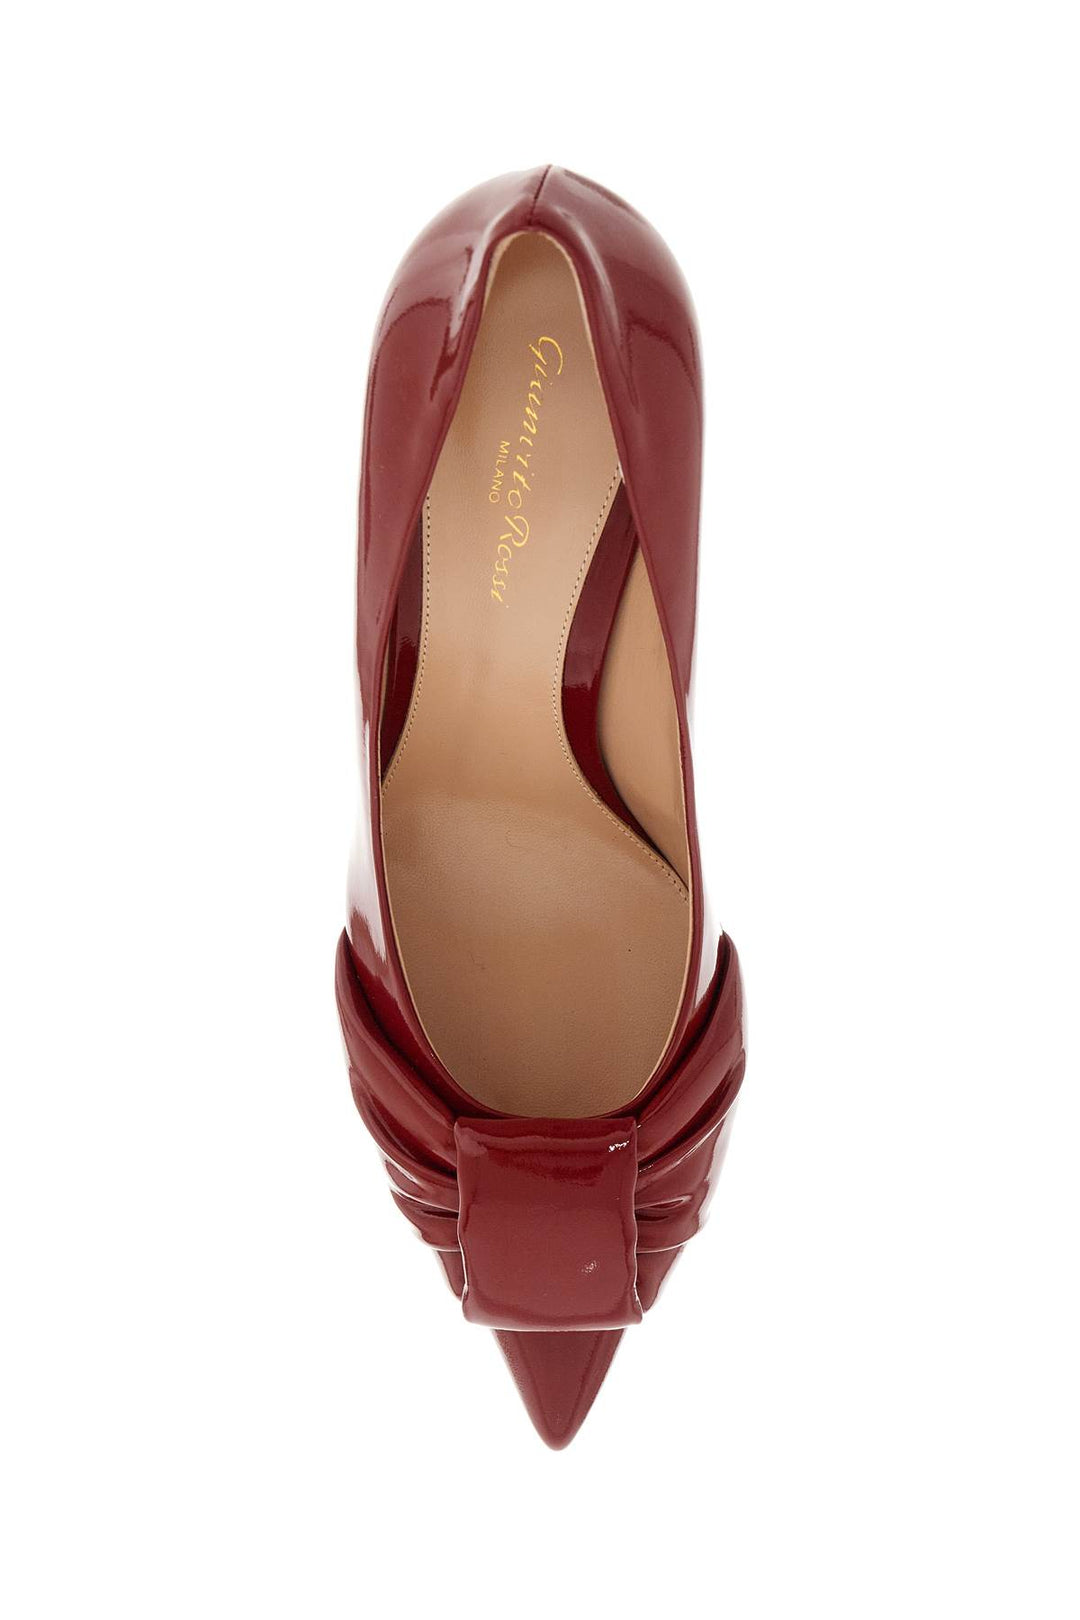 Gianvito Rossi Patent Leather Décollet   Red